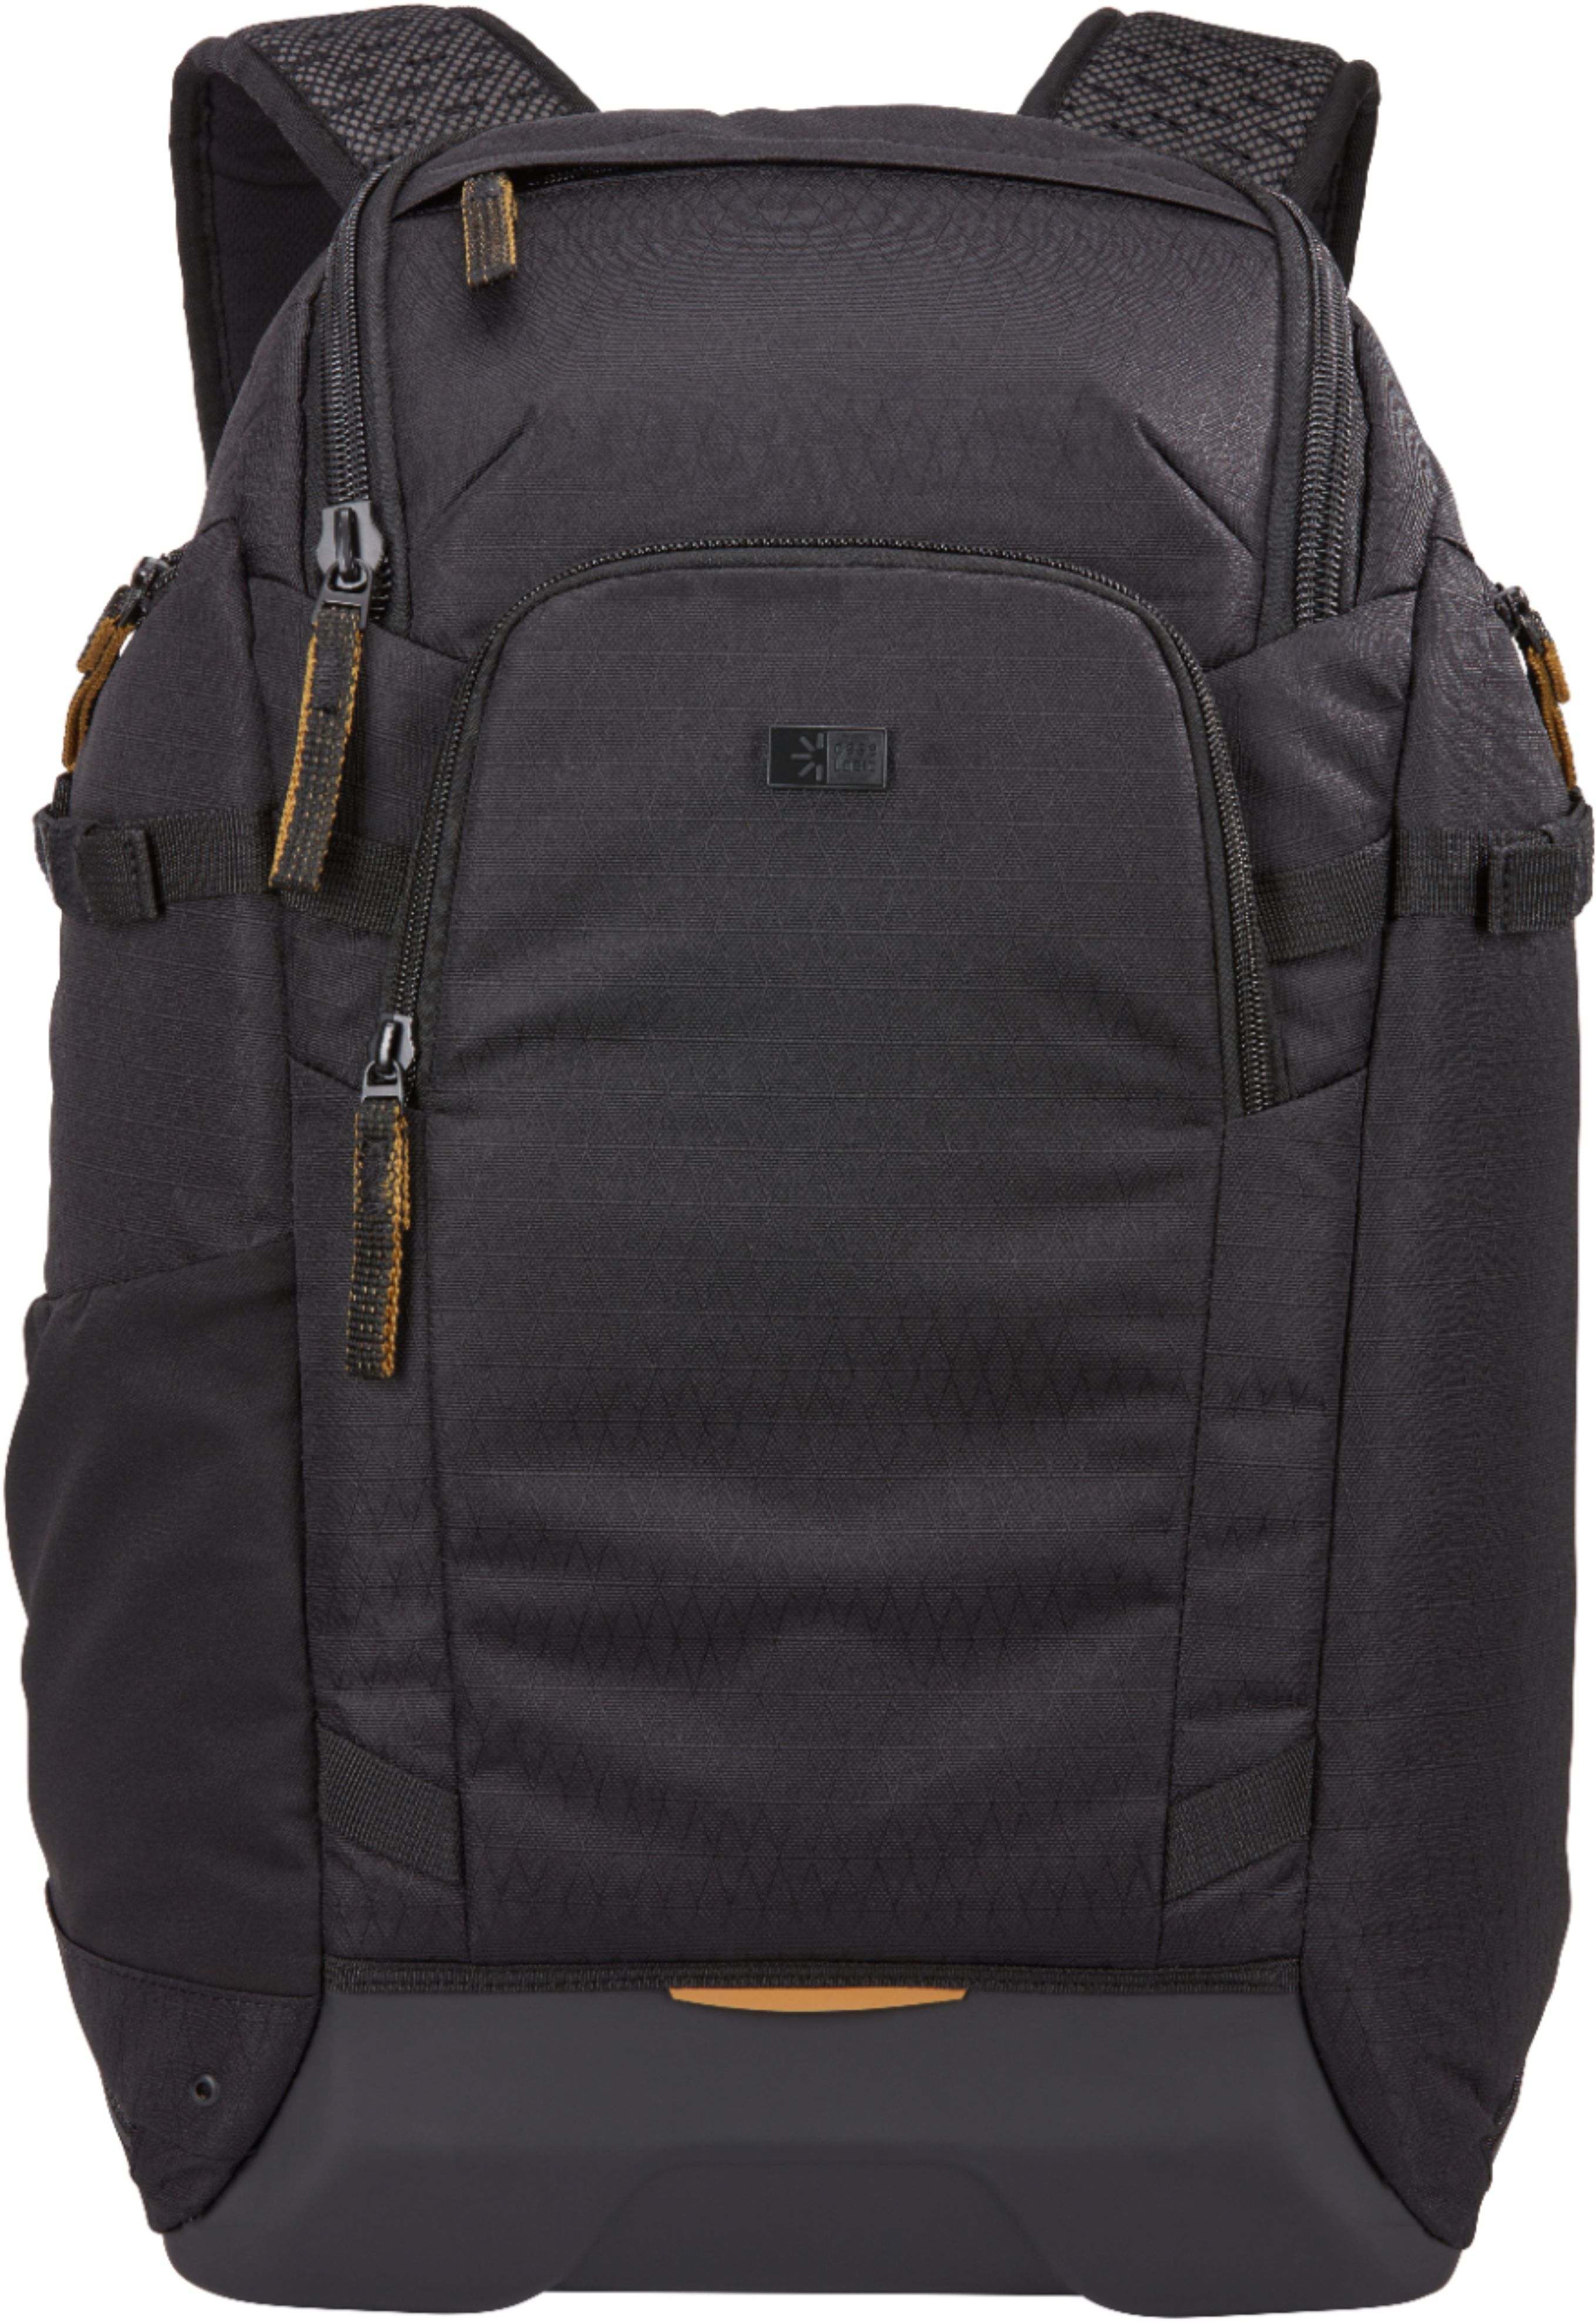 Angle View: Peak Design - Everyday Backpack V2 20L - Midnight